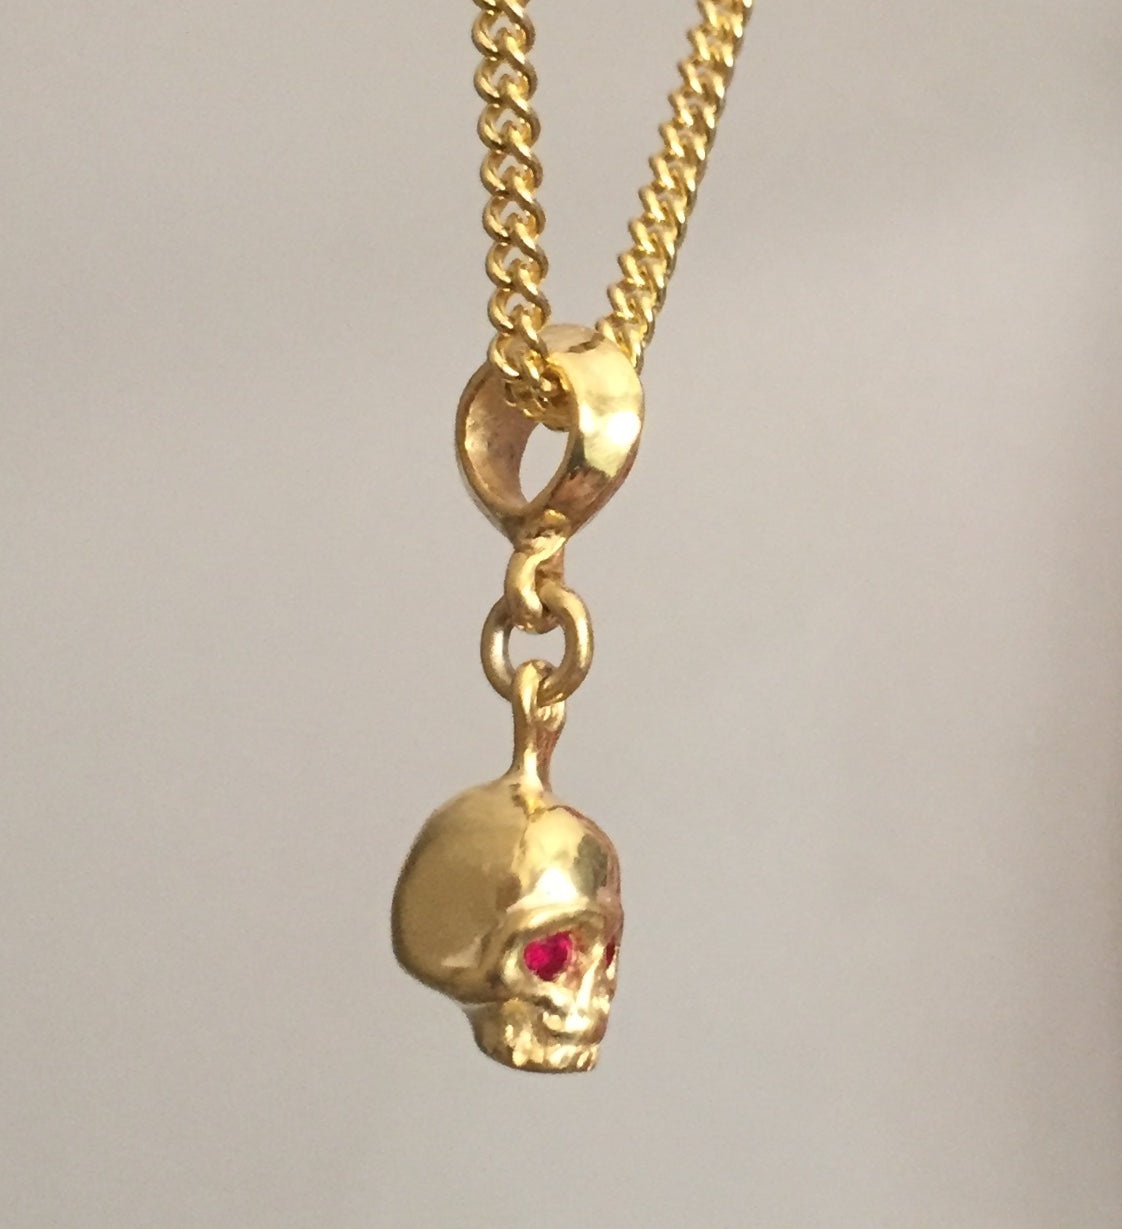 Necklace - Sterling silver Golden Skull w Rubies